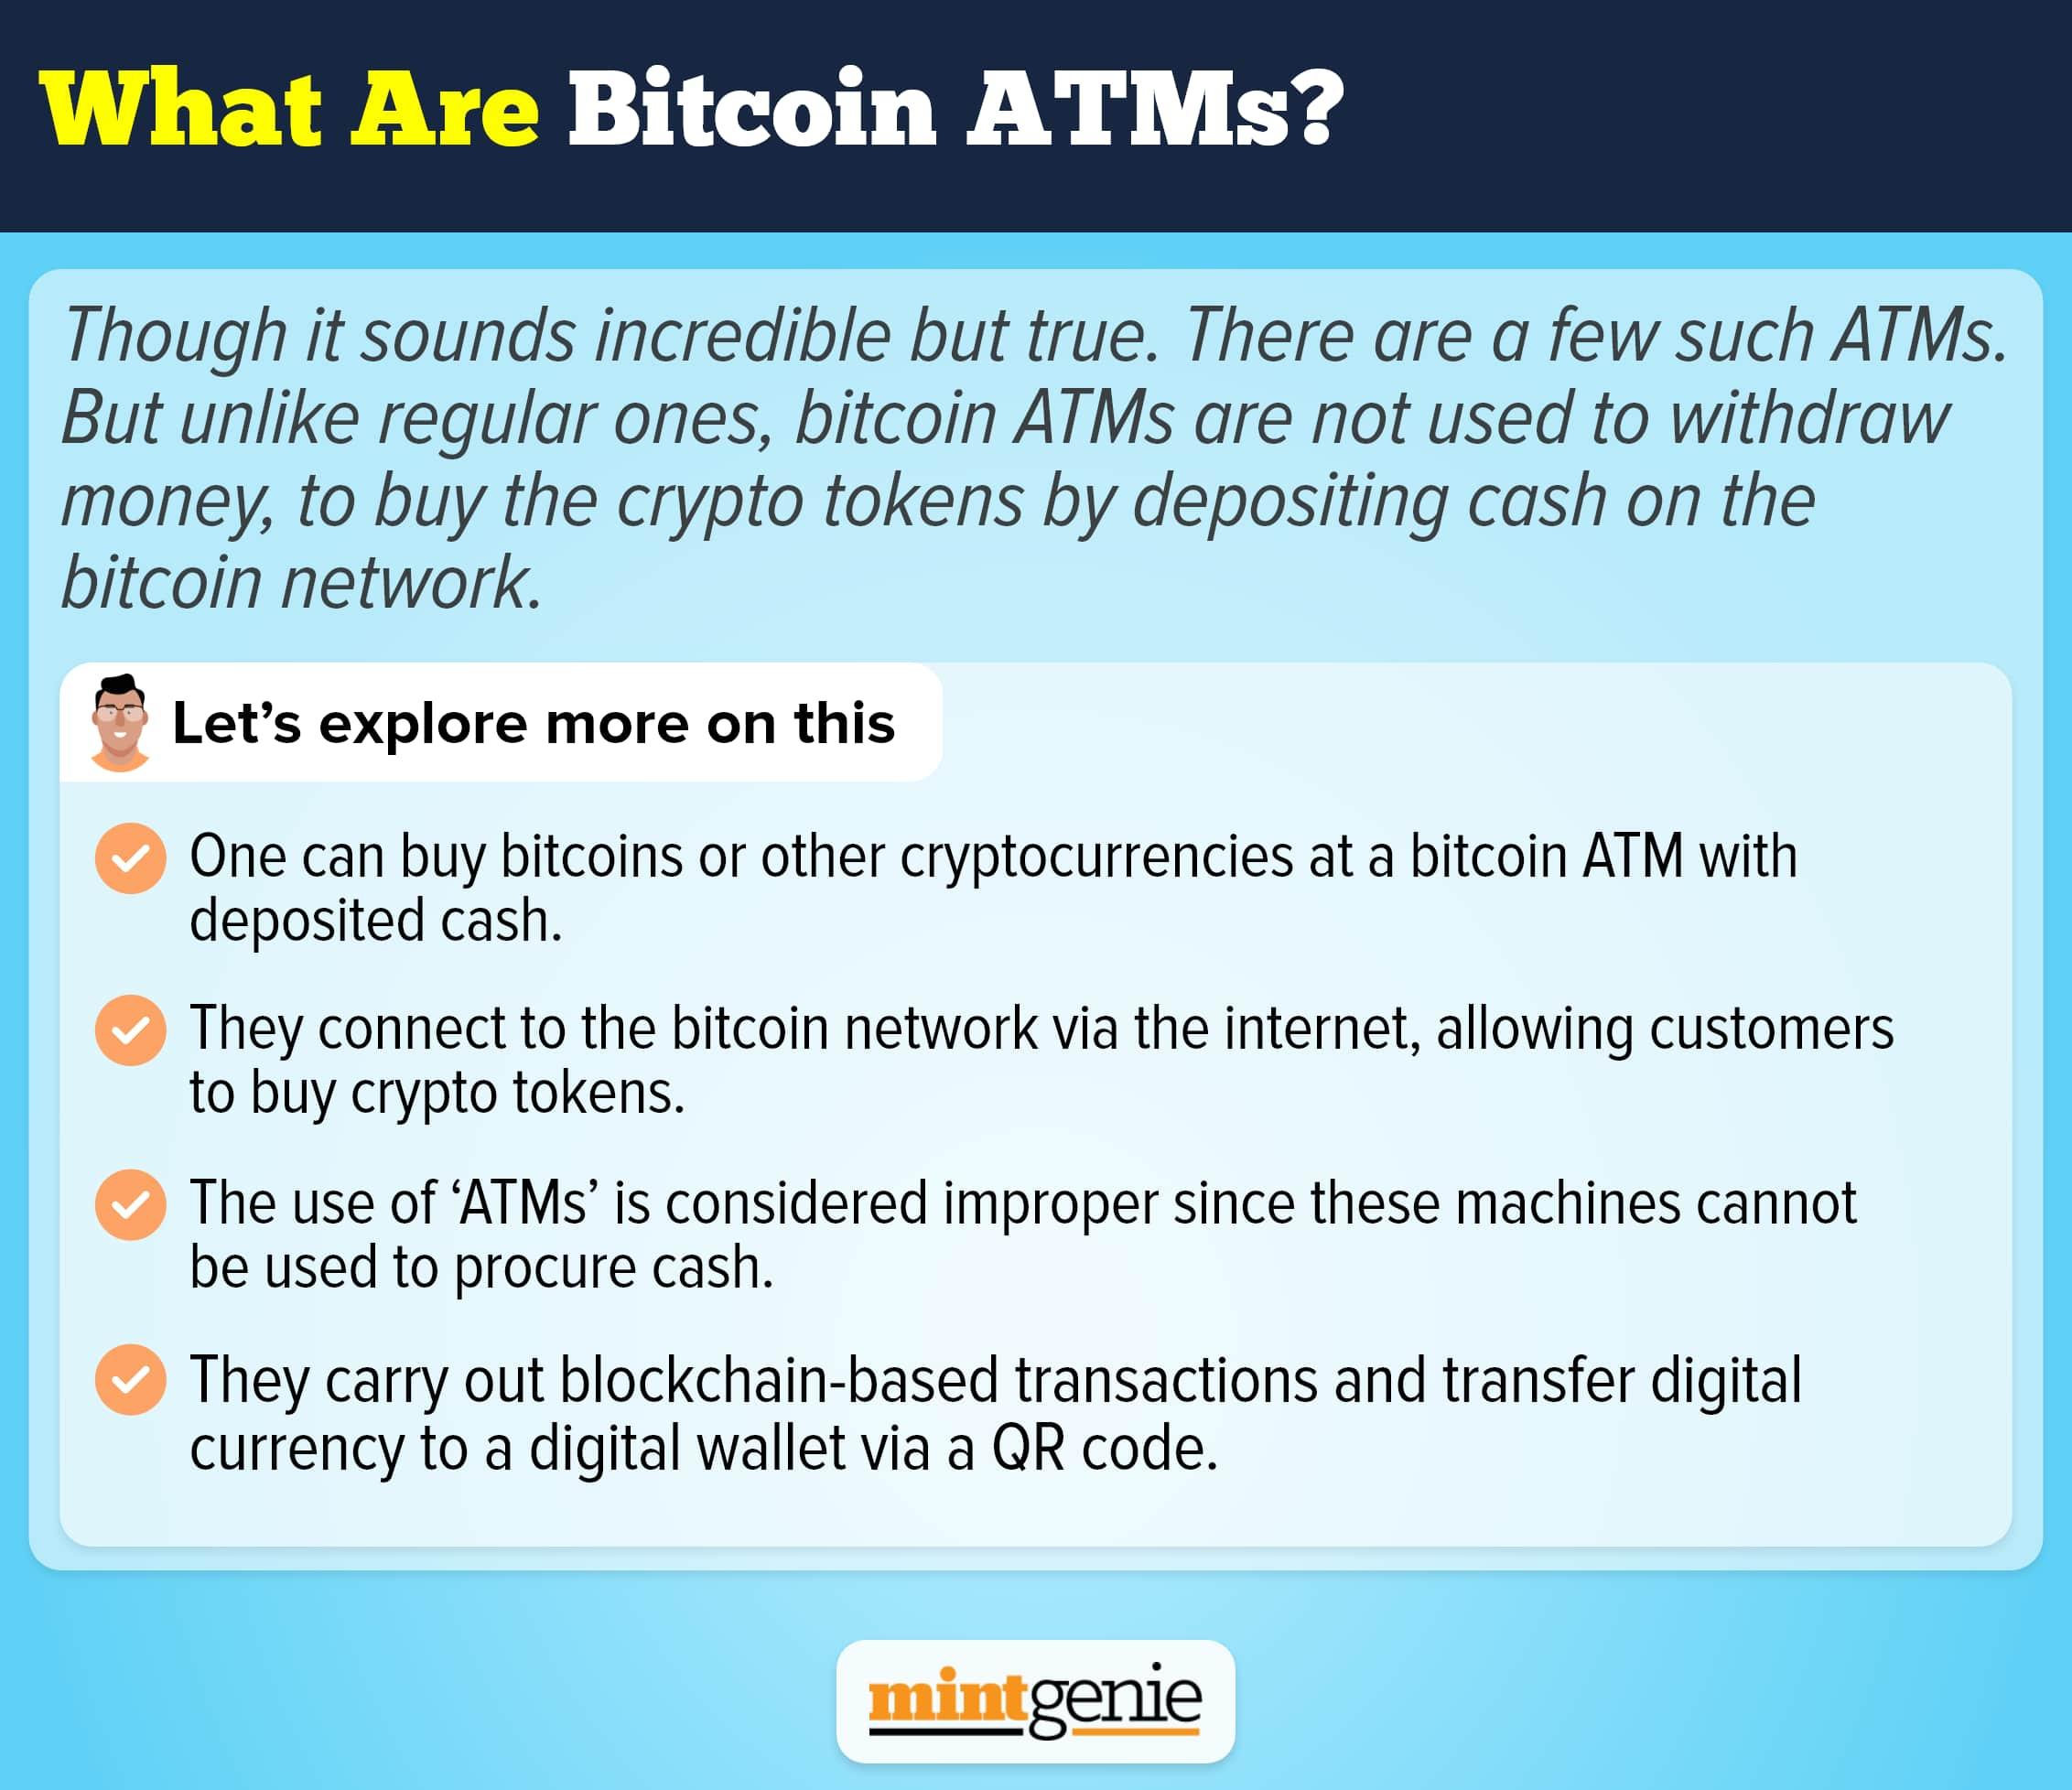 One can buy bitcoins or other cryptocurrencies at a bitcoin ATM with the deposited cash,&nbsp;